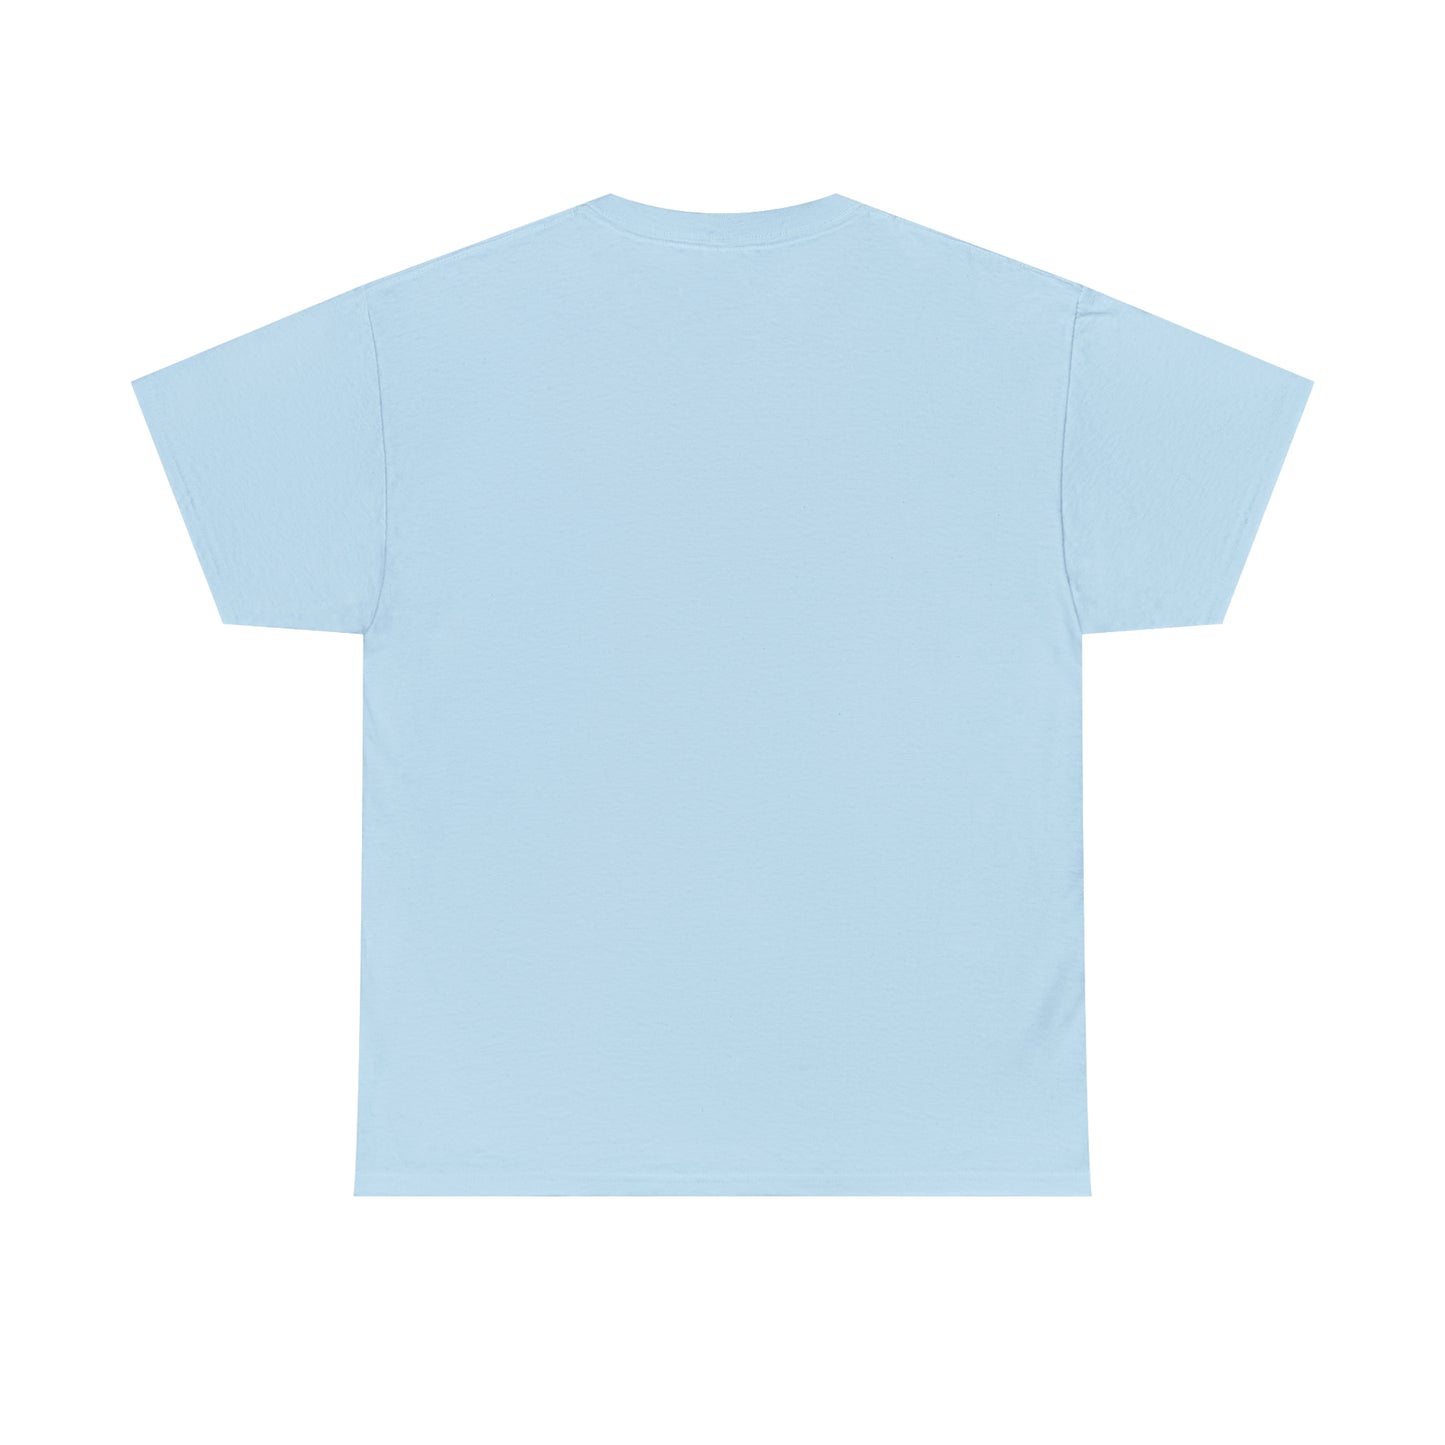 DRP® - Fly Jumper Tee